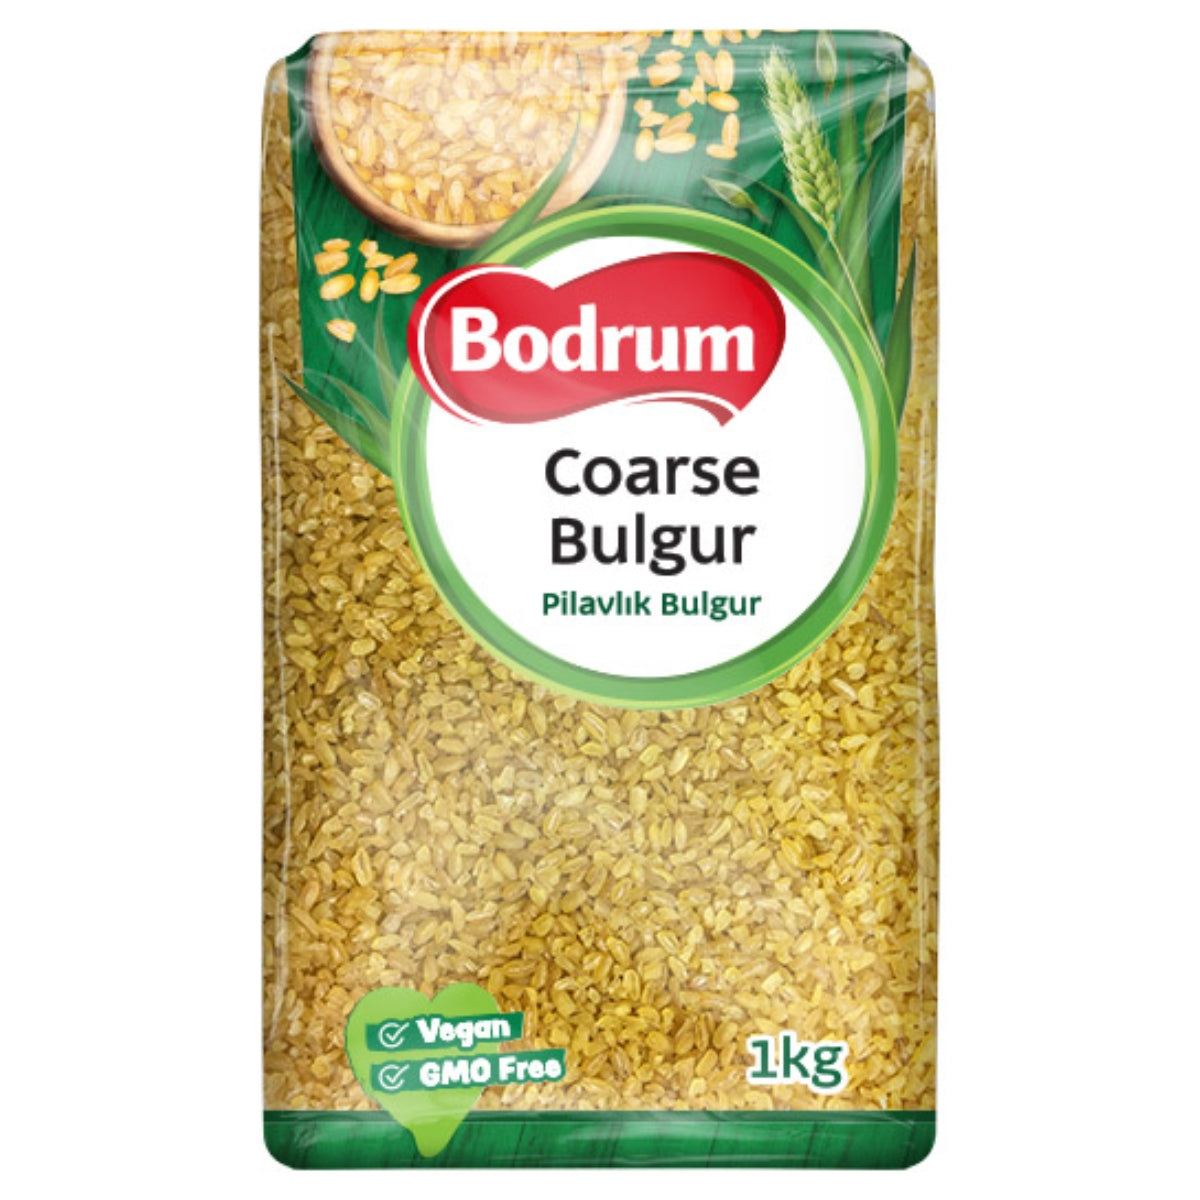 Sentence with Product Name: 1-kilogram package of Bodrum - Coarse Bulgur Wheat (Pilavlık) - 1Kg, labeled as vegan and gmo-free.